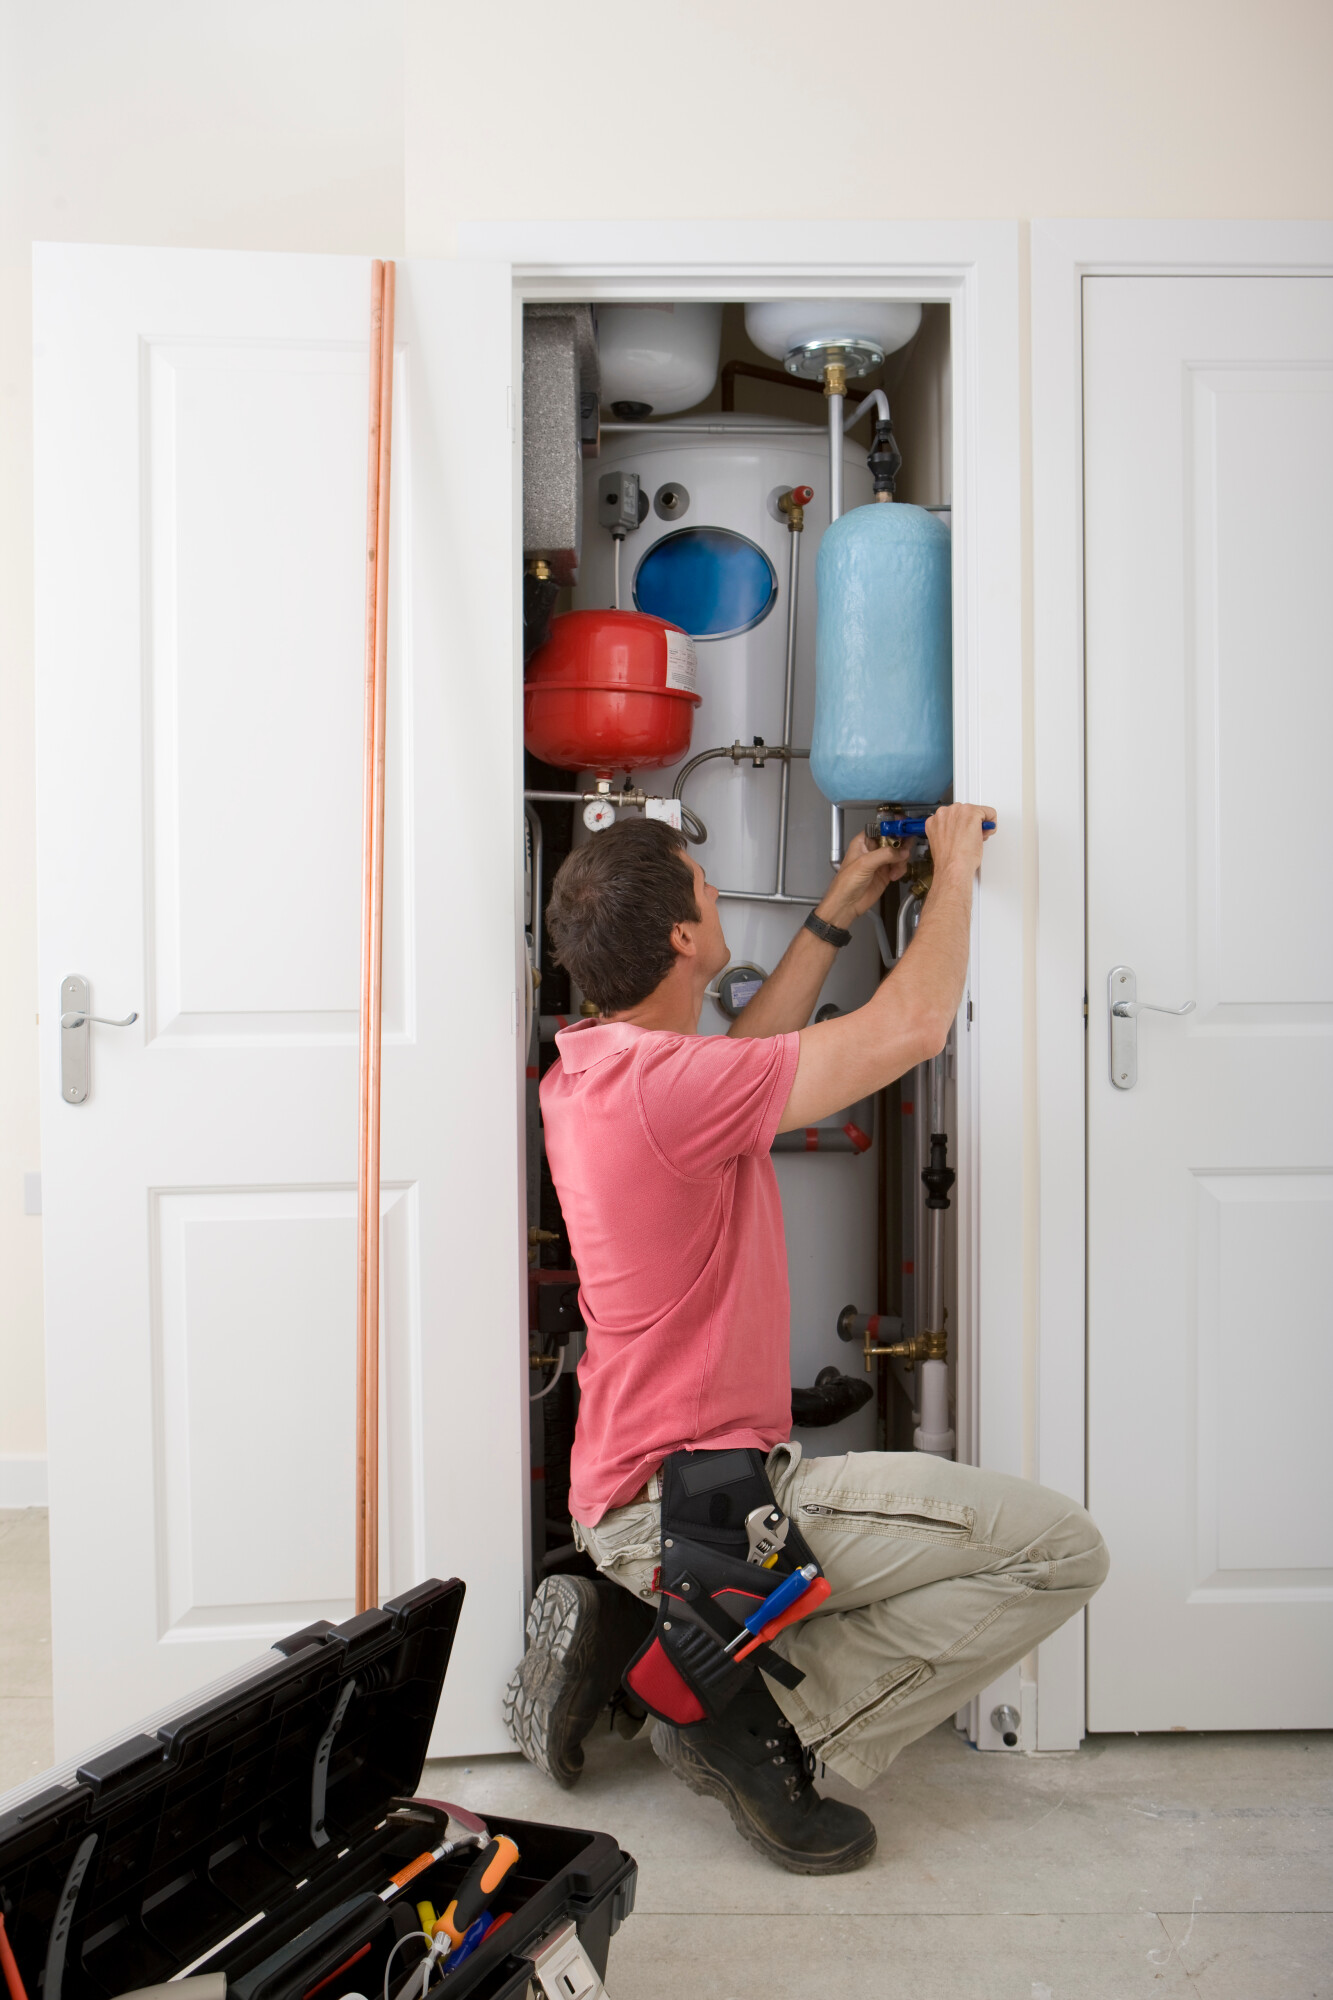 Your trusty hot water heater may not be feeling well, so it's a good idea to check up on it. Here are the signs it's time for a hot water heater replacement.